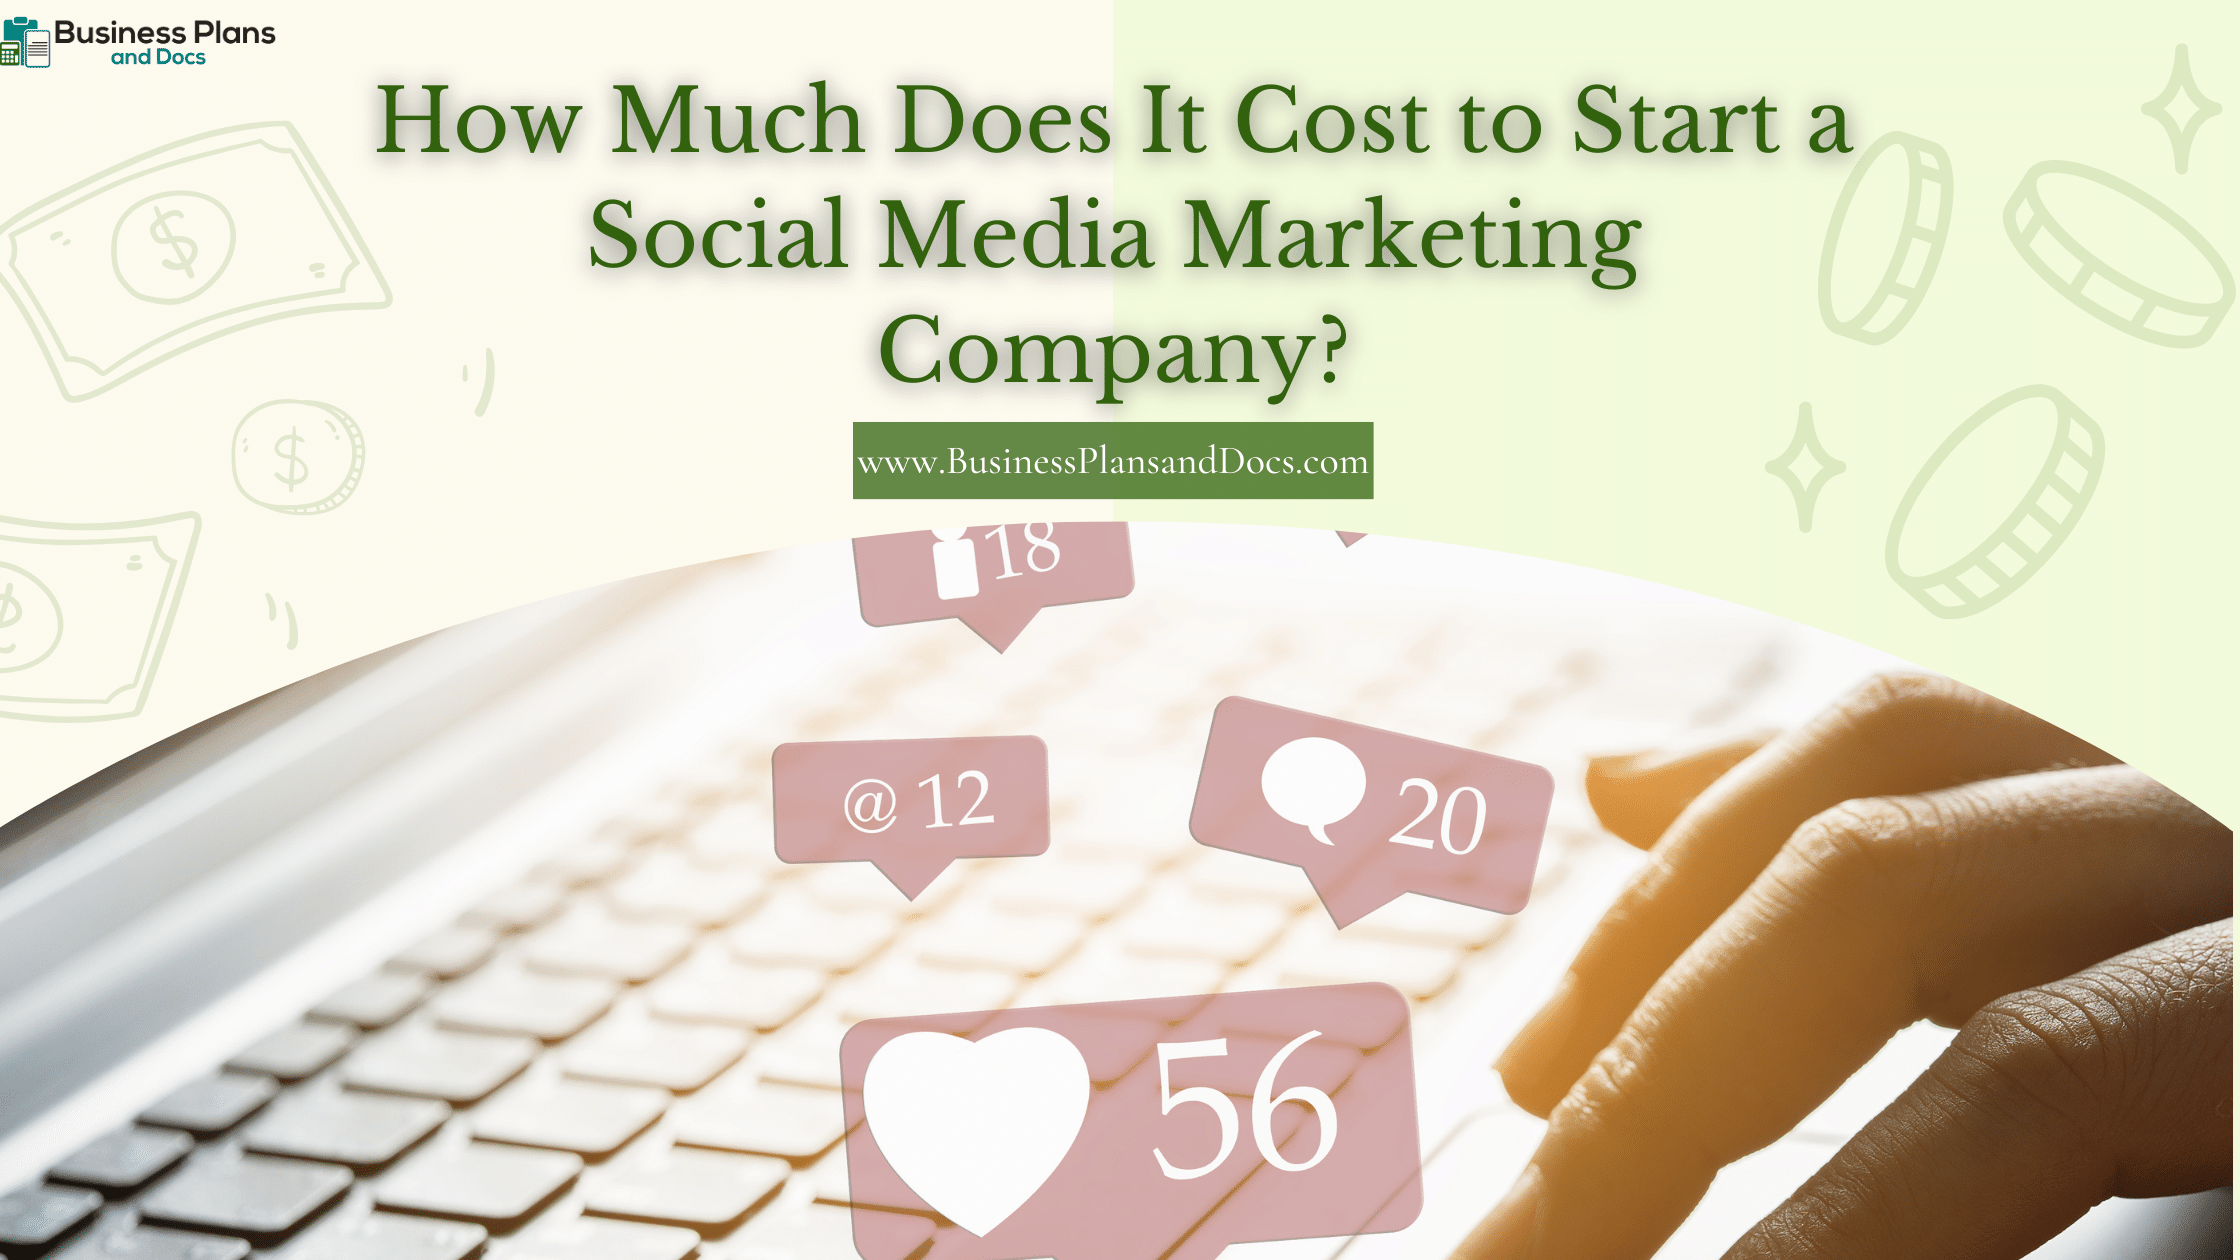 How Much Does It Cost to Start a Social Media Marketing Company?